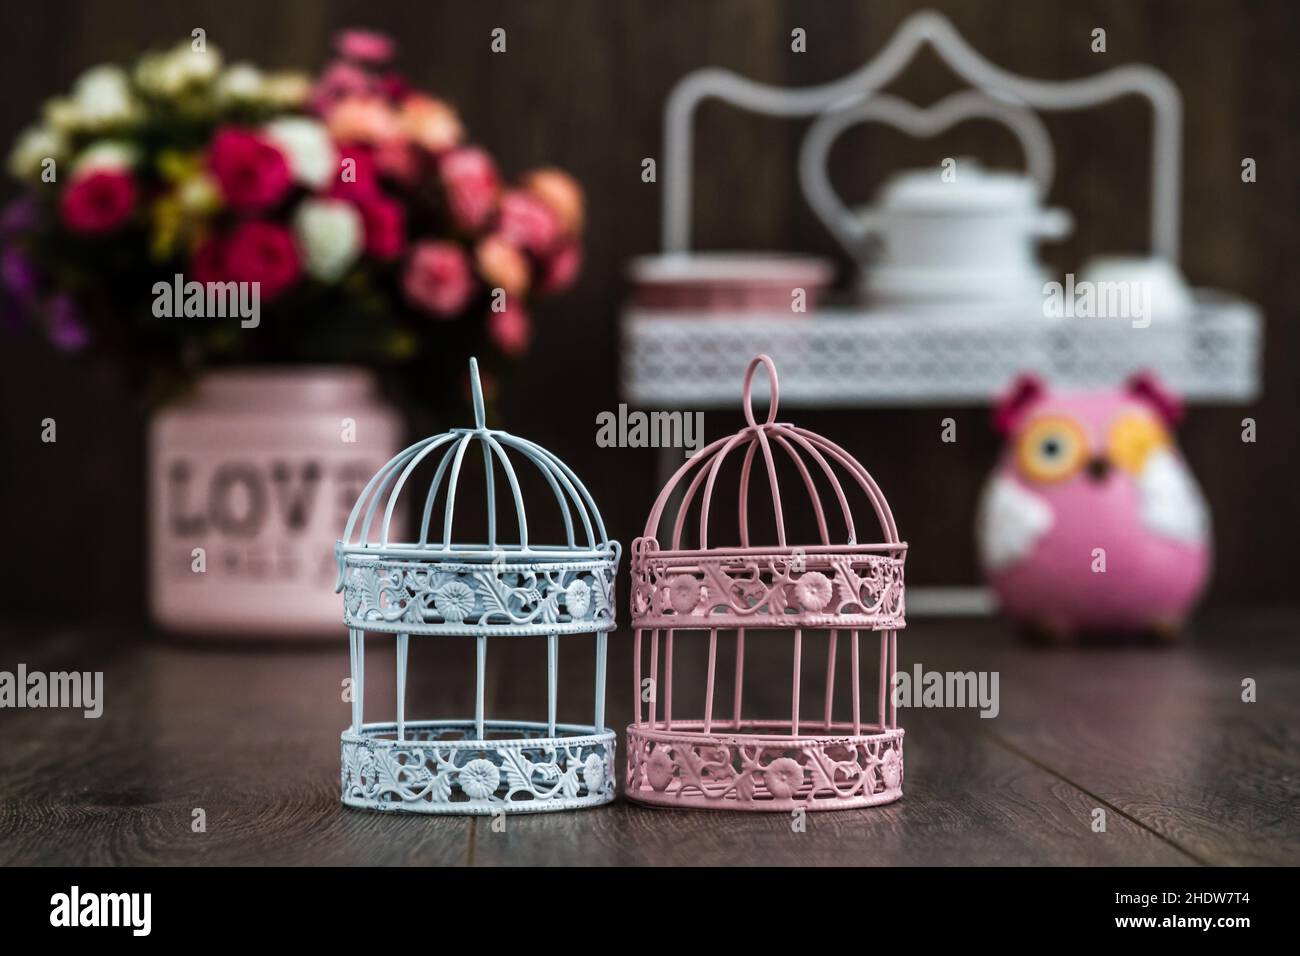 candleholder, wire cage, candleholders Stock Photo